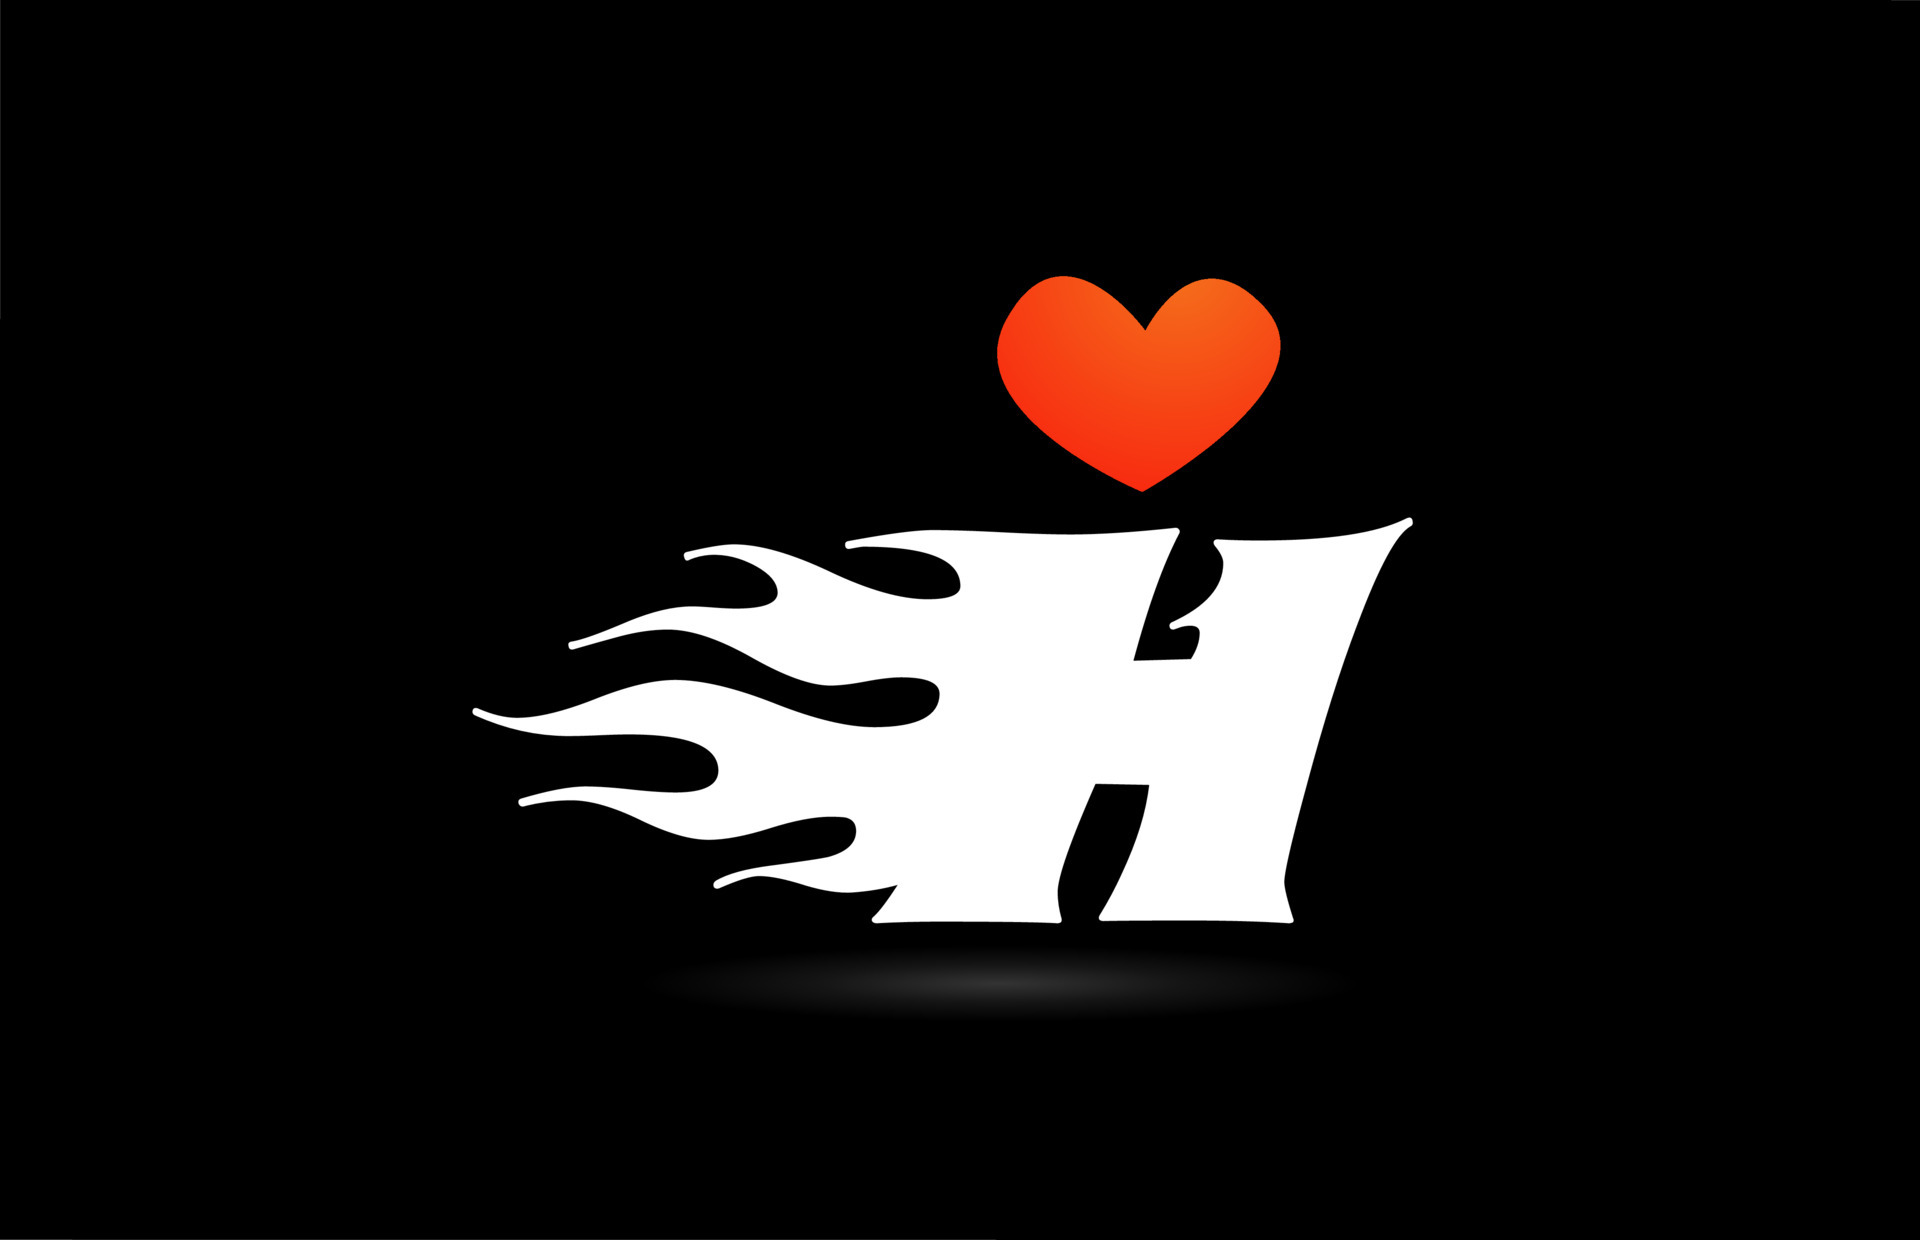 H Letter Wallpapers - Wallpaper Cave